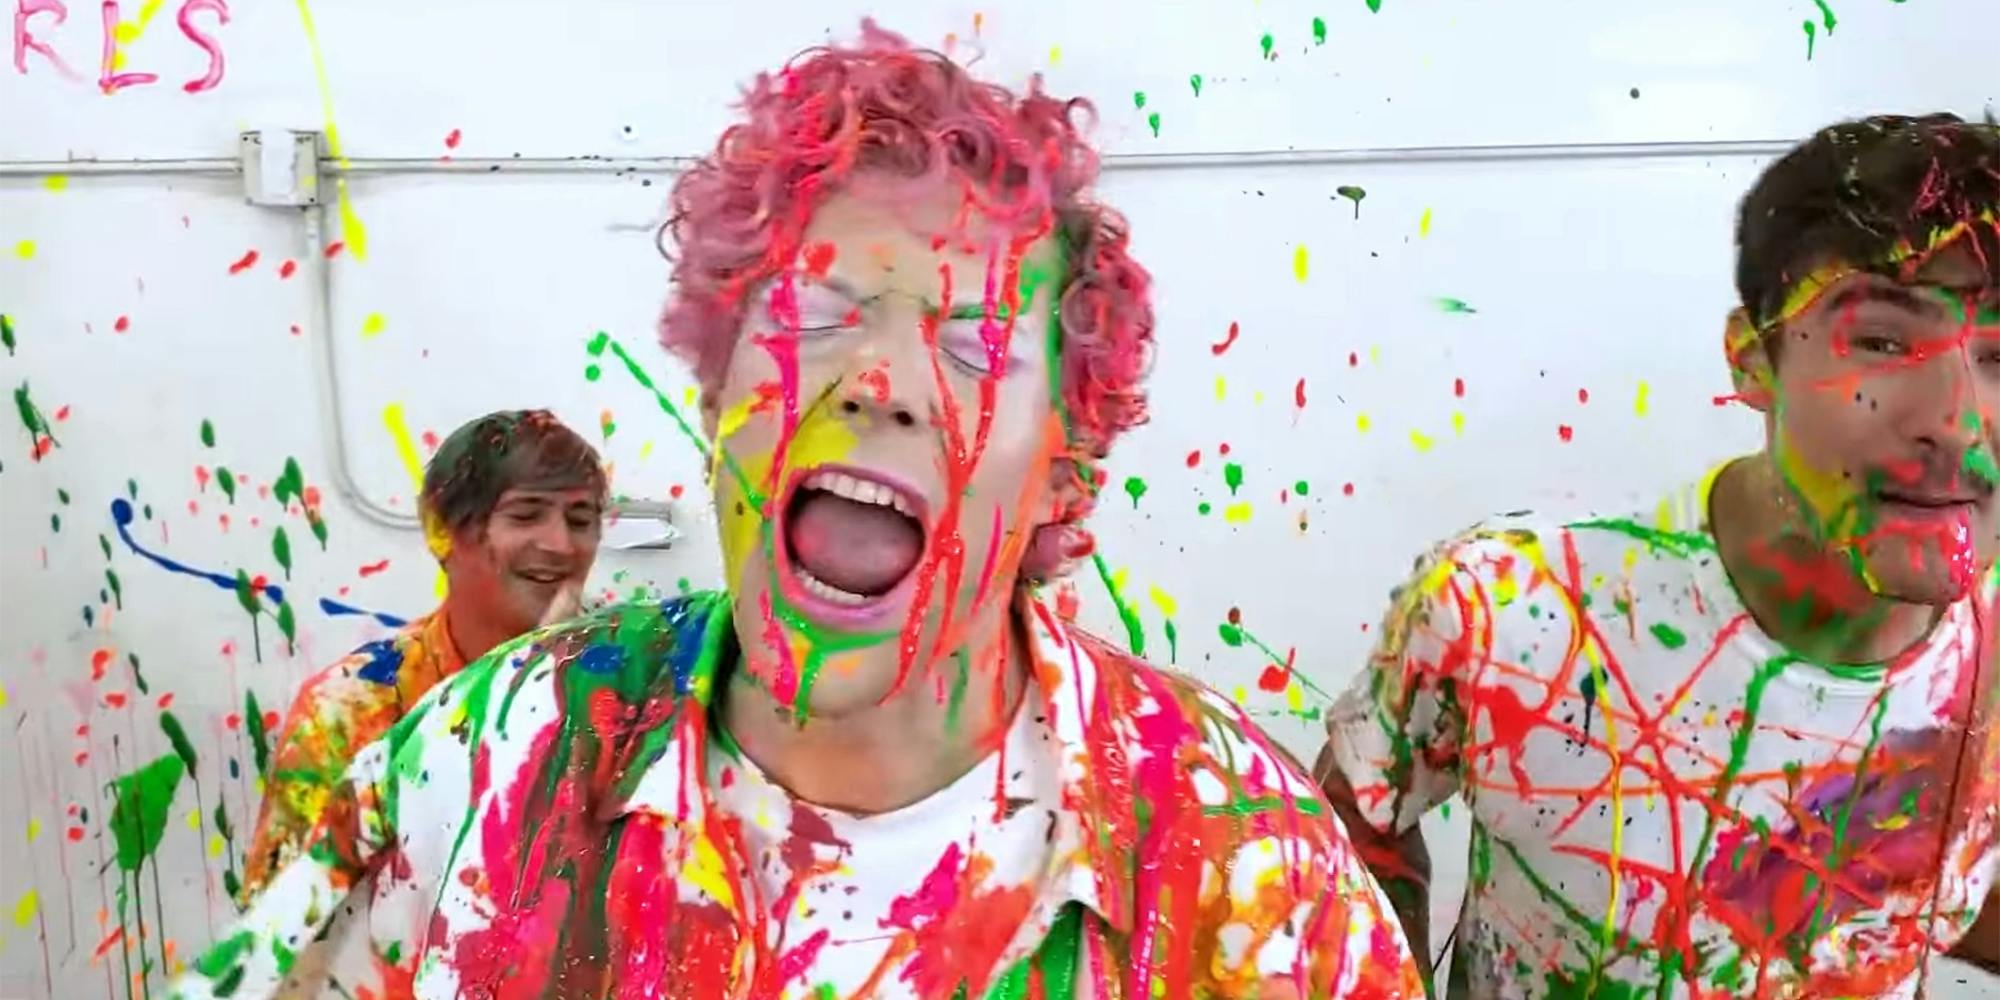 band members covered in paint